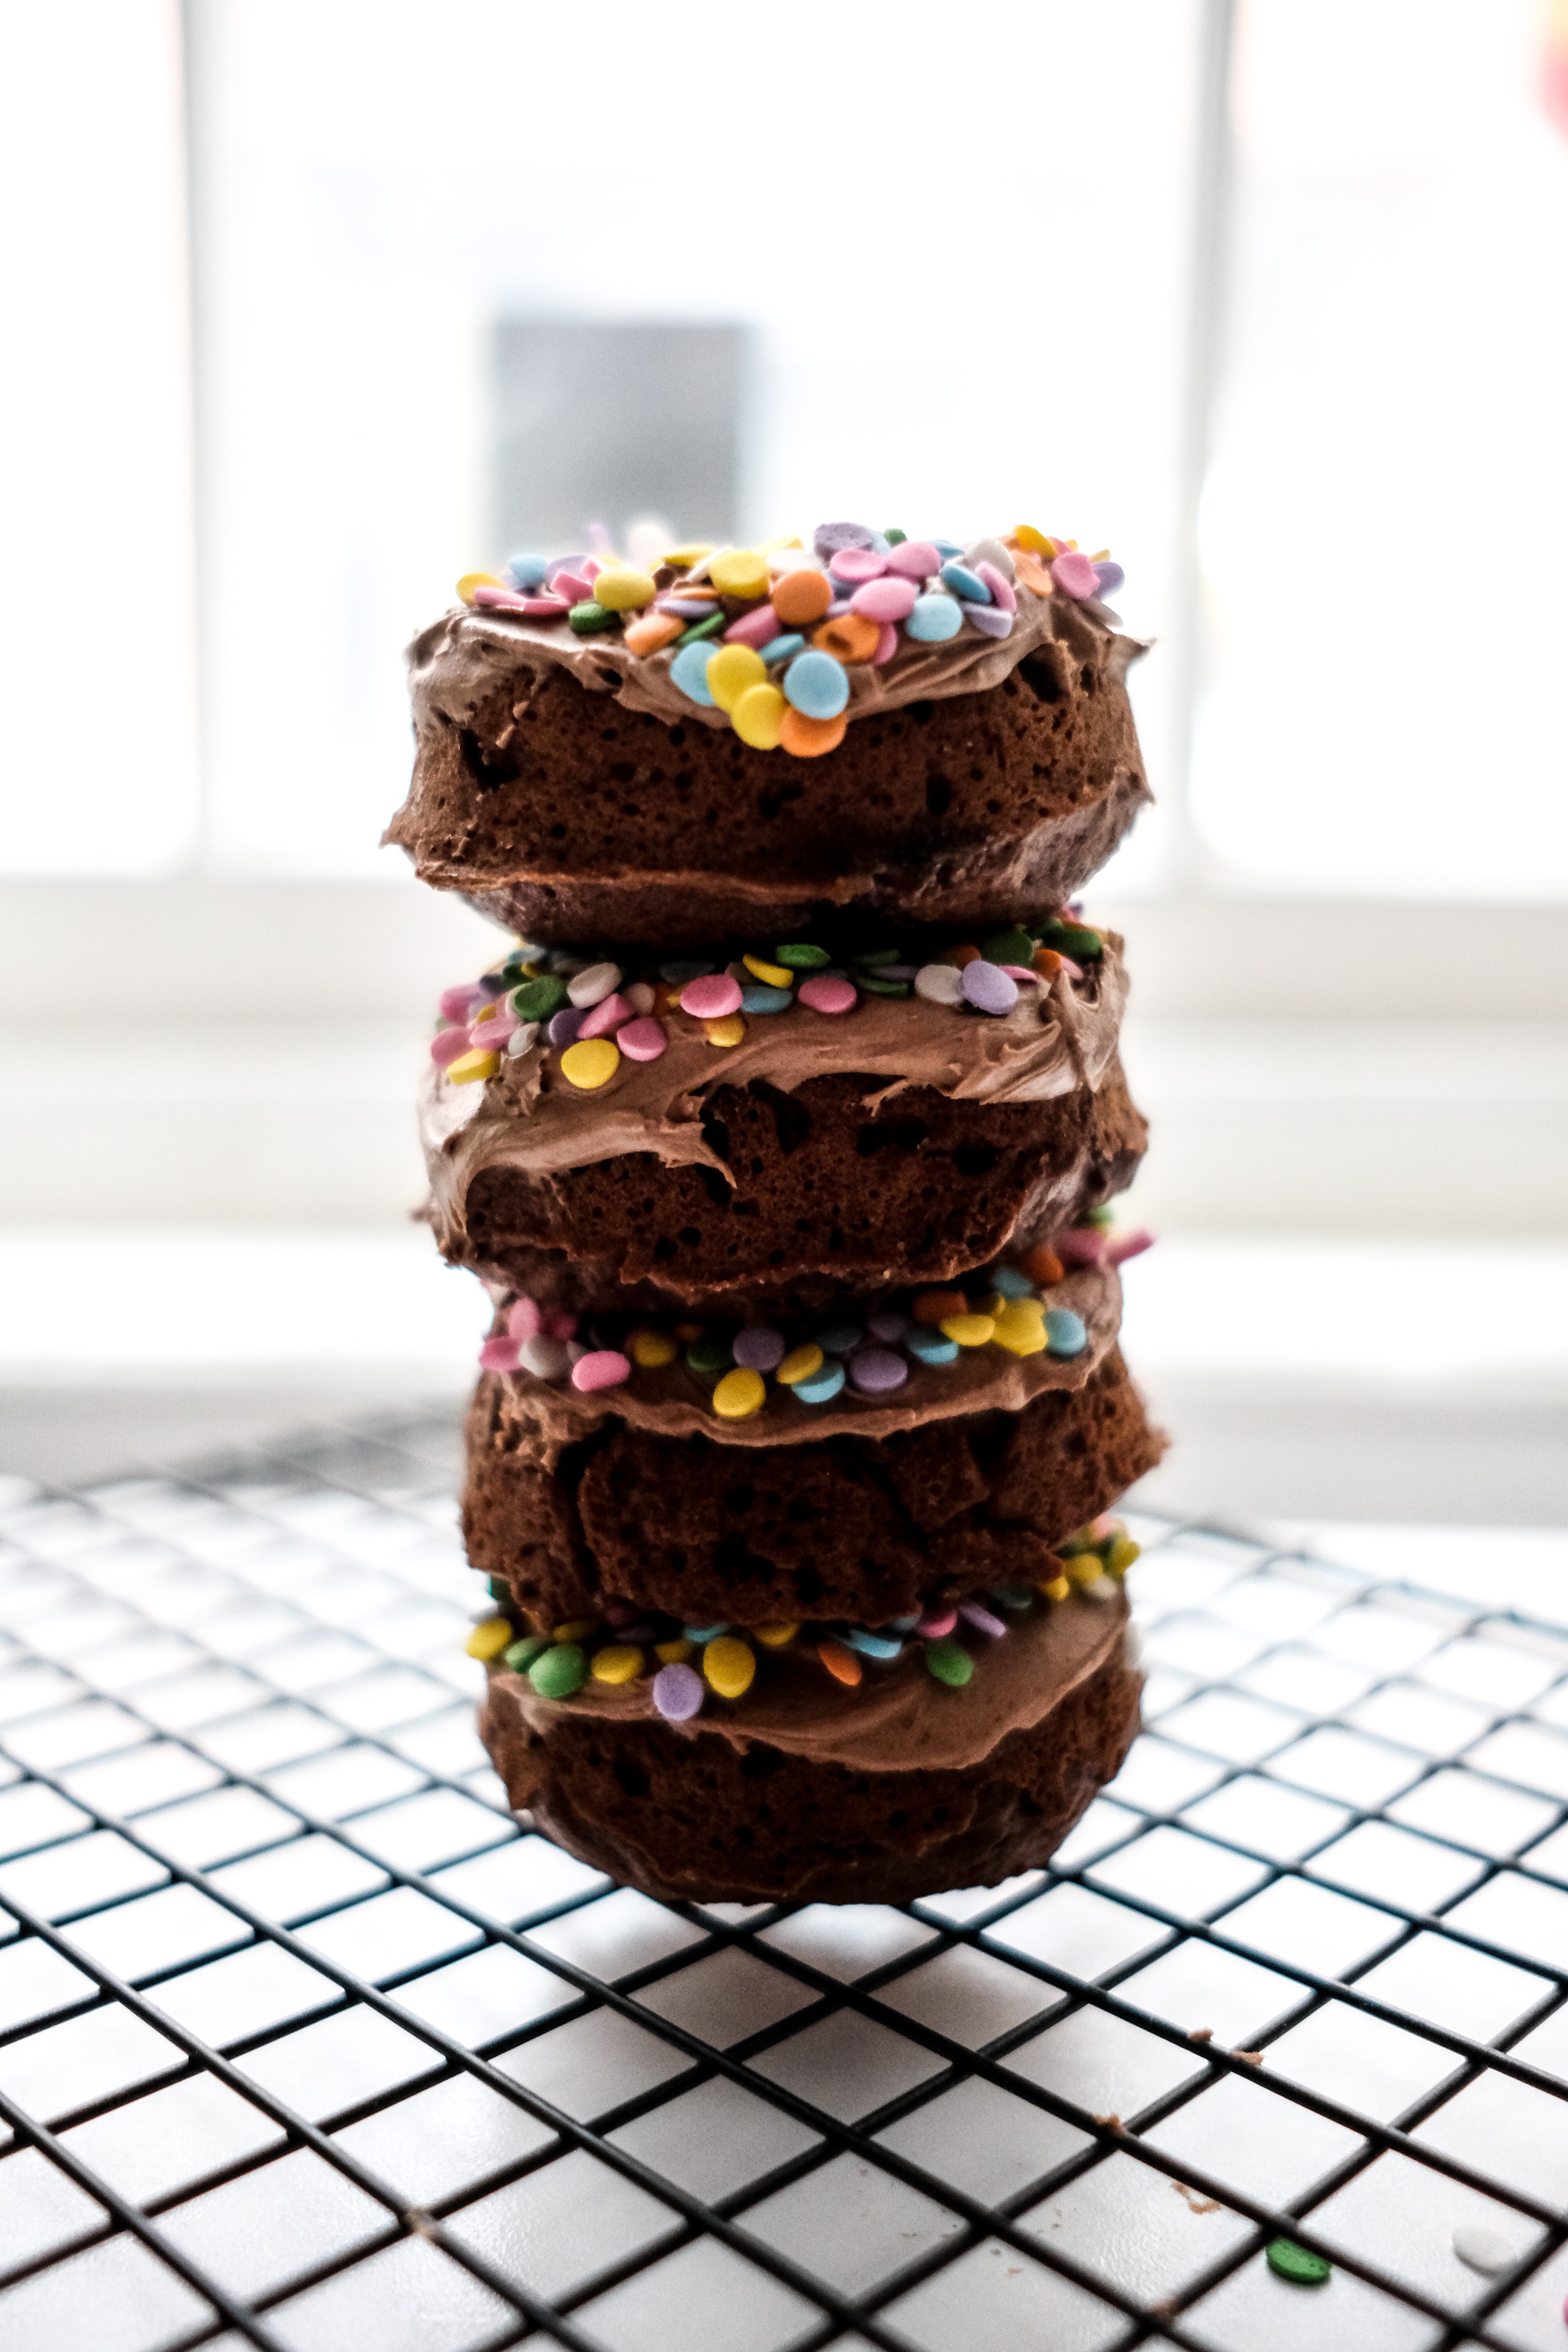 Lifestyle Blog Chocolate and Lace shares her recipe for Baked Chocolate Donuts.